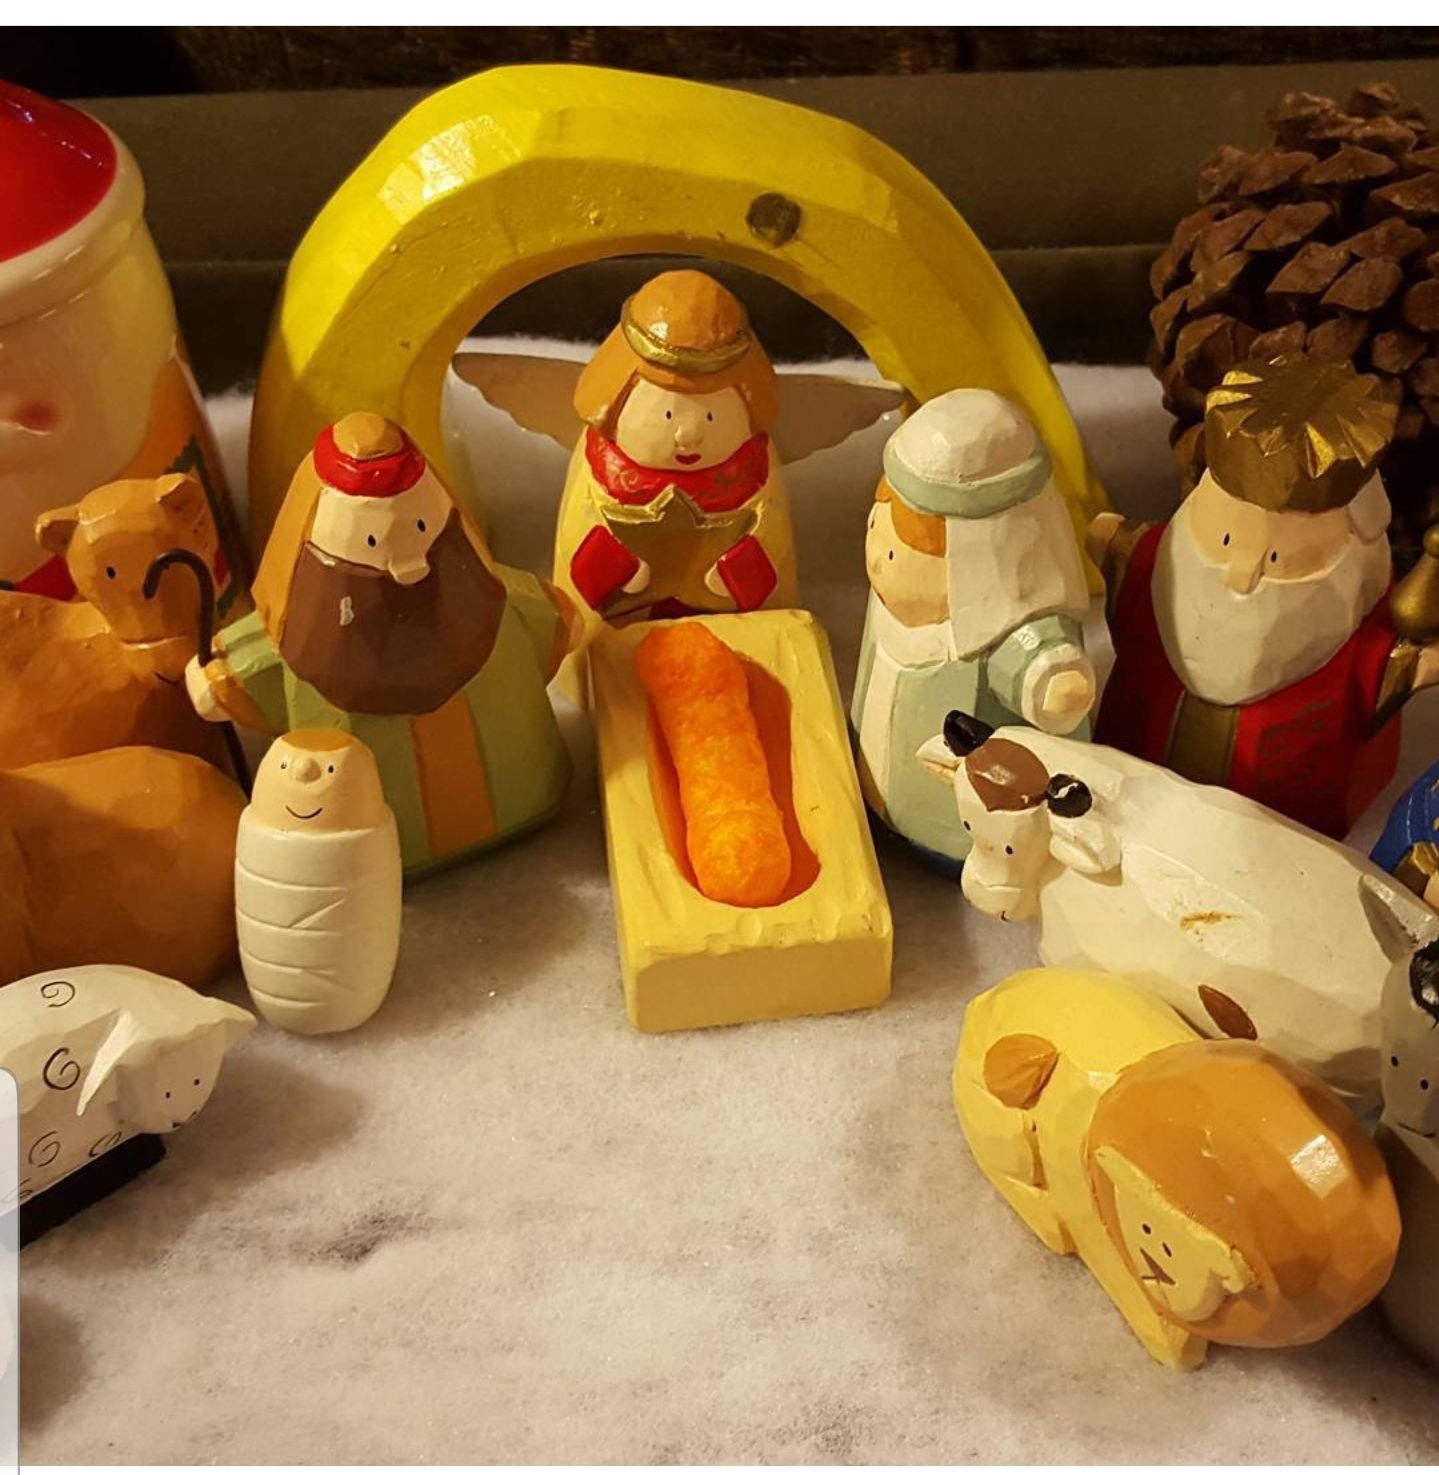 Some wise ass put a Cheeto in the manger.